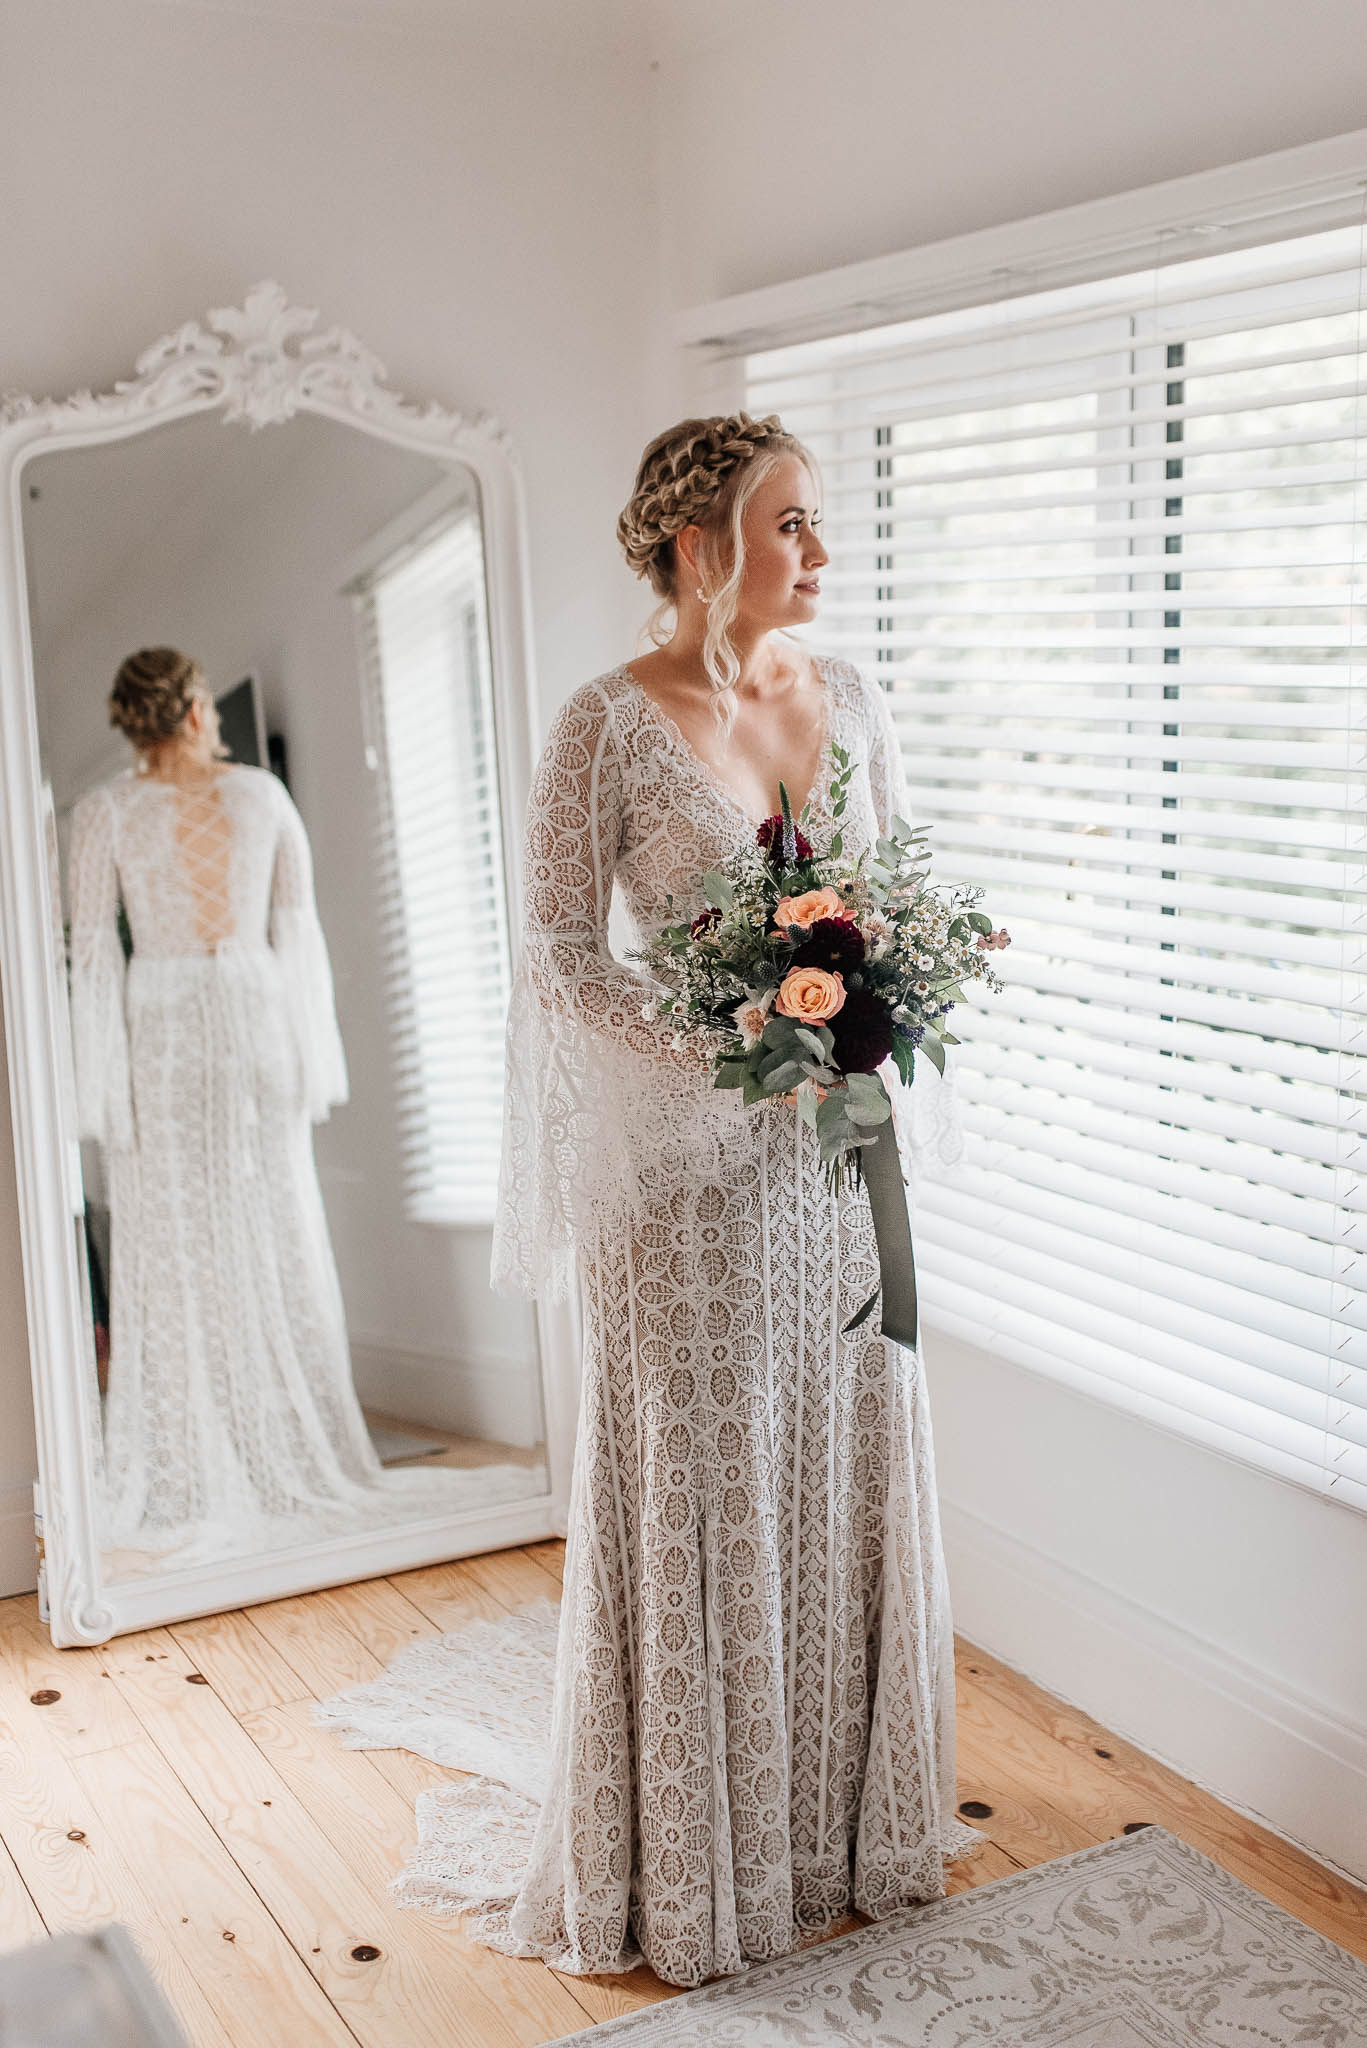 Bride in front of a window